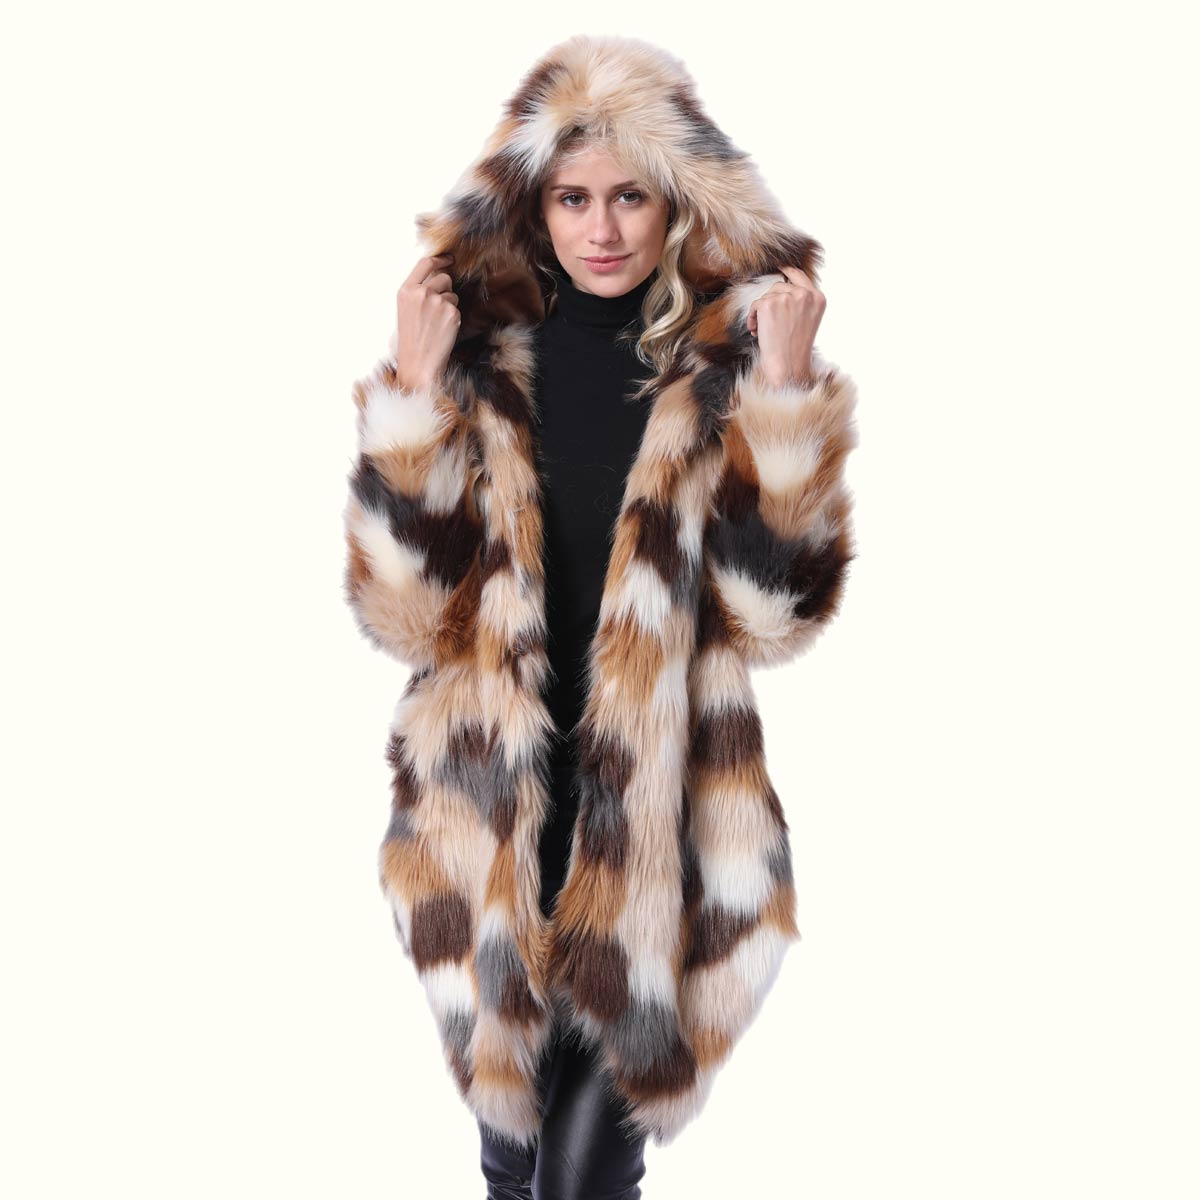 Multi Color Fox Fur Coat Model wearing a hat viewed from front